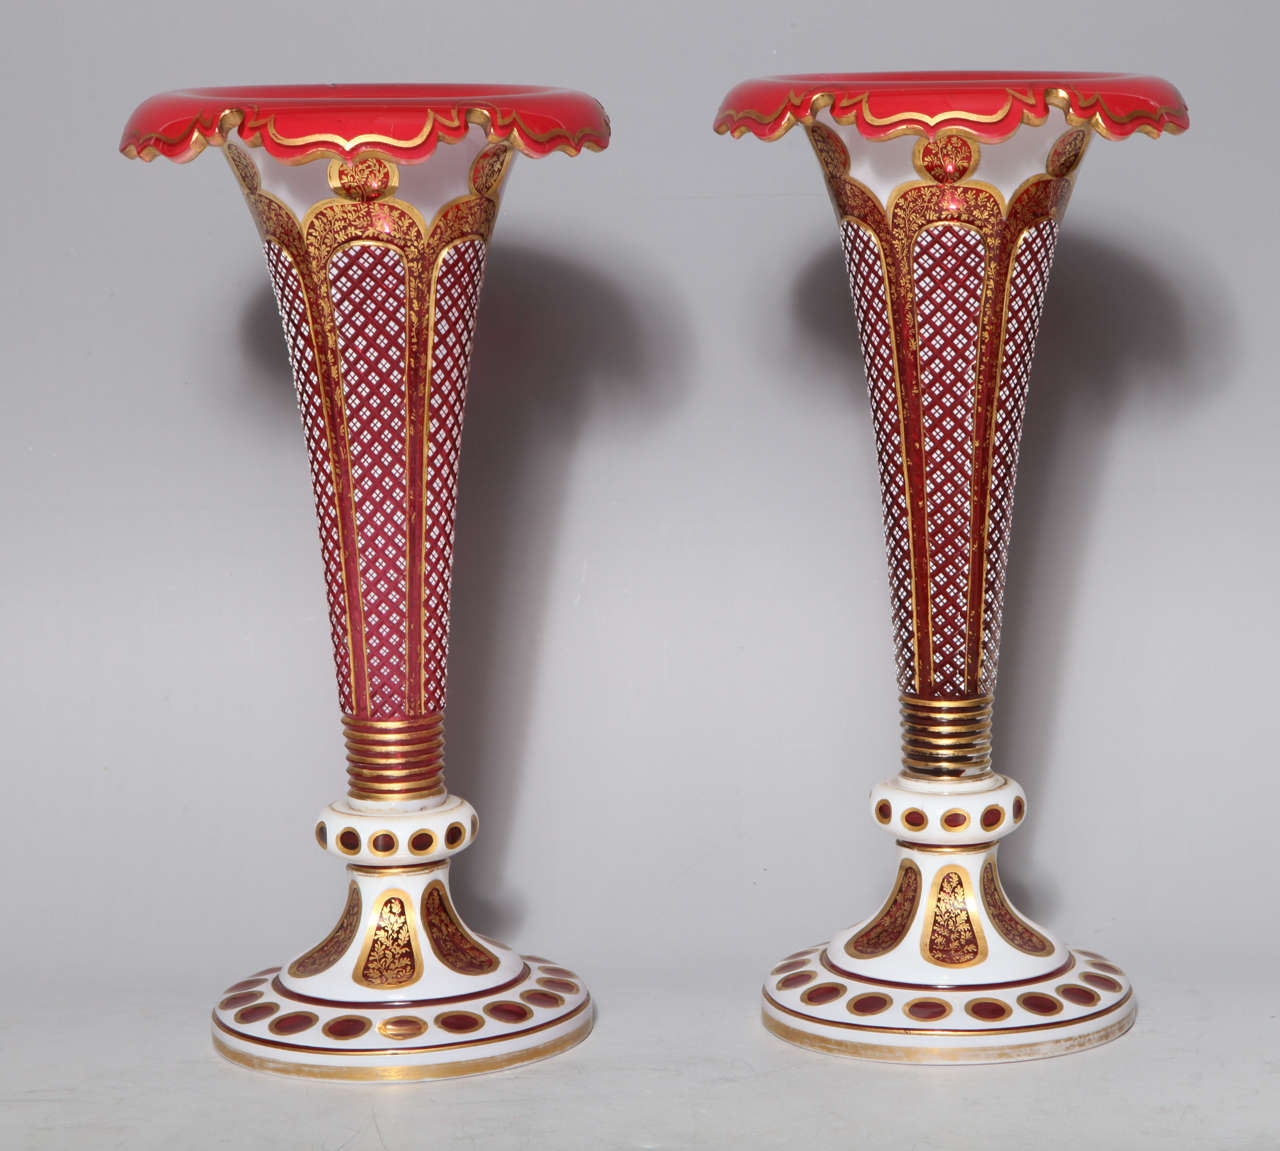 Pair of Antique Bohemian Double Overlay Cut-Glass Vases In Good Condition For Sale In New York, NY